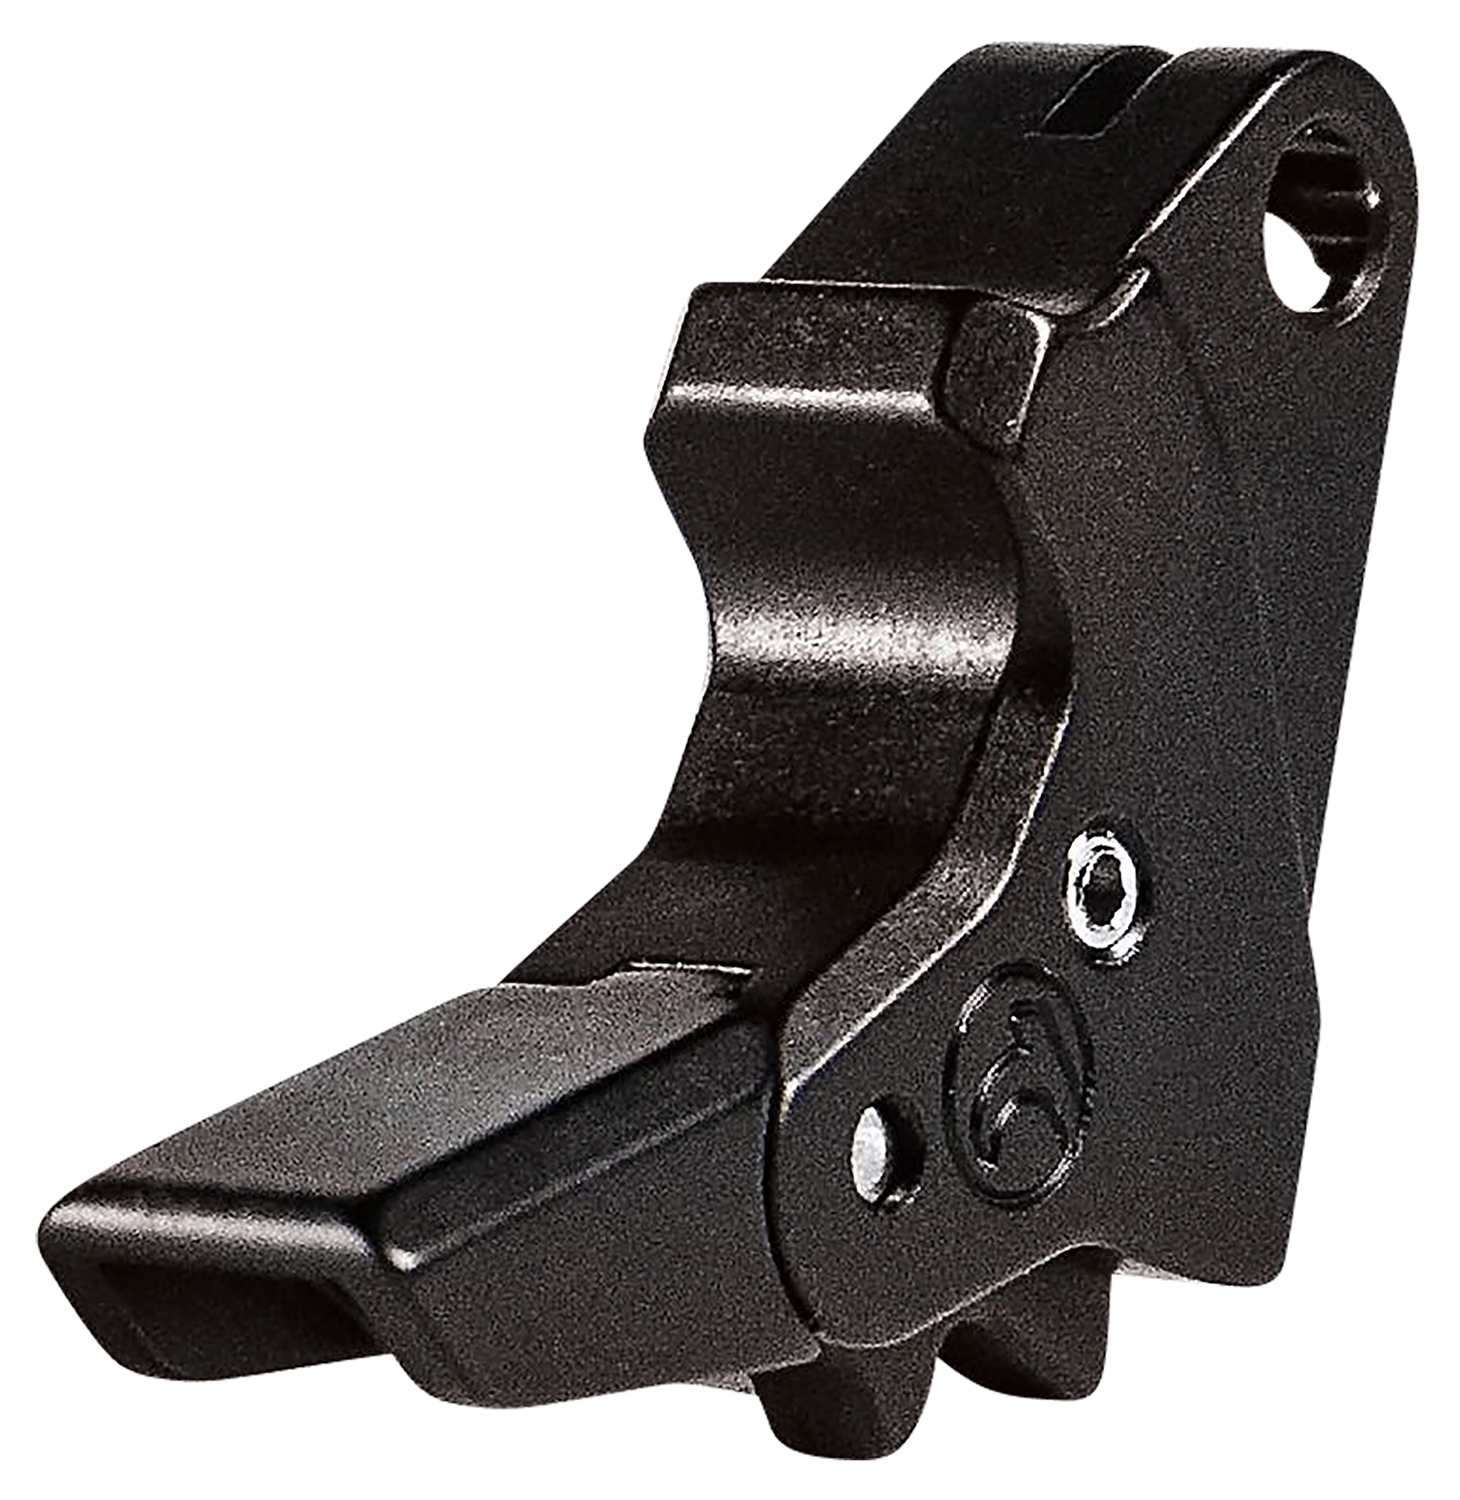 https://cityarsenal.com/product/timney-triggers-alpha-competition-trigger-for-smith-wesson-mp-black-finish-swmp/